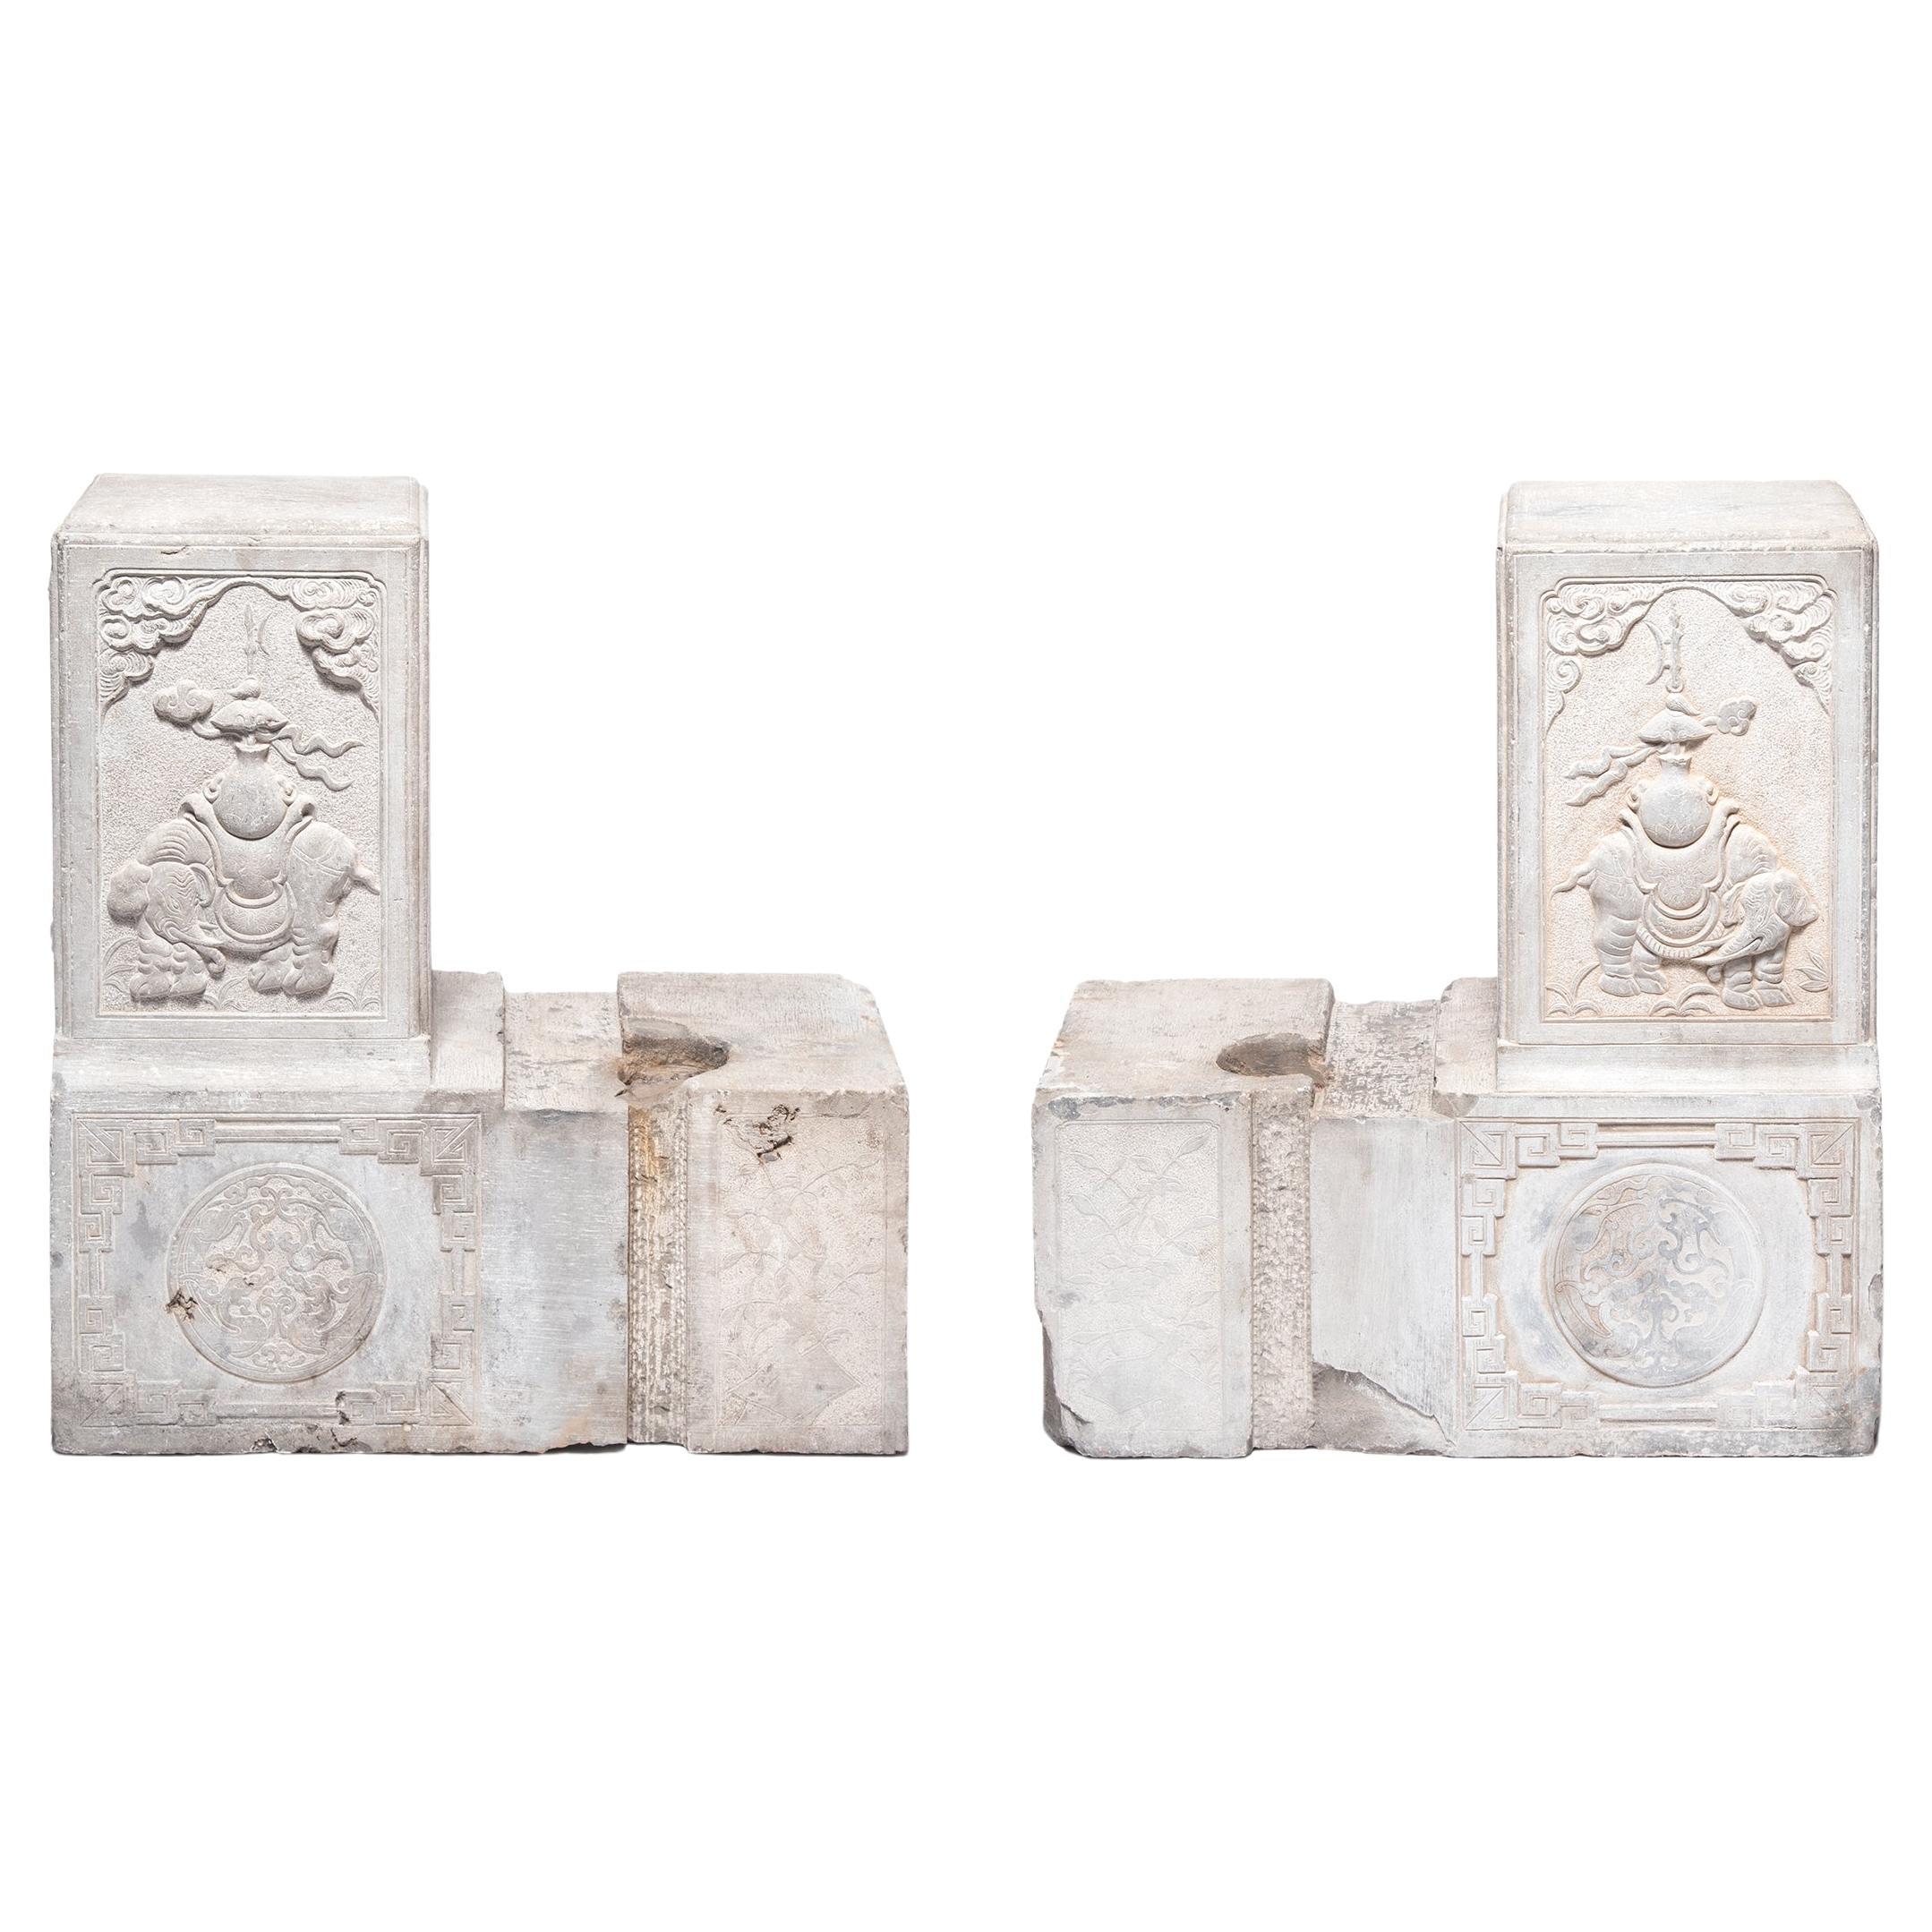 Pair of Chinese Stone Door Posts with Mythical Elephants, c. 1850 For Sale